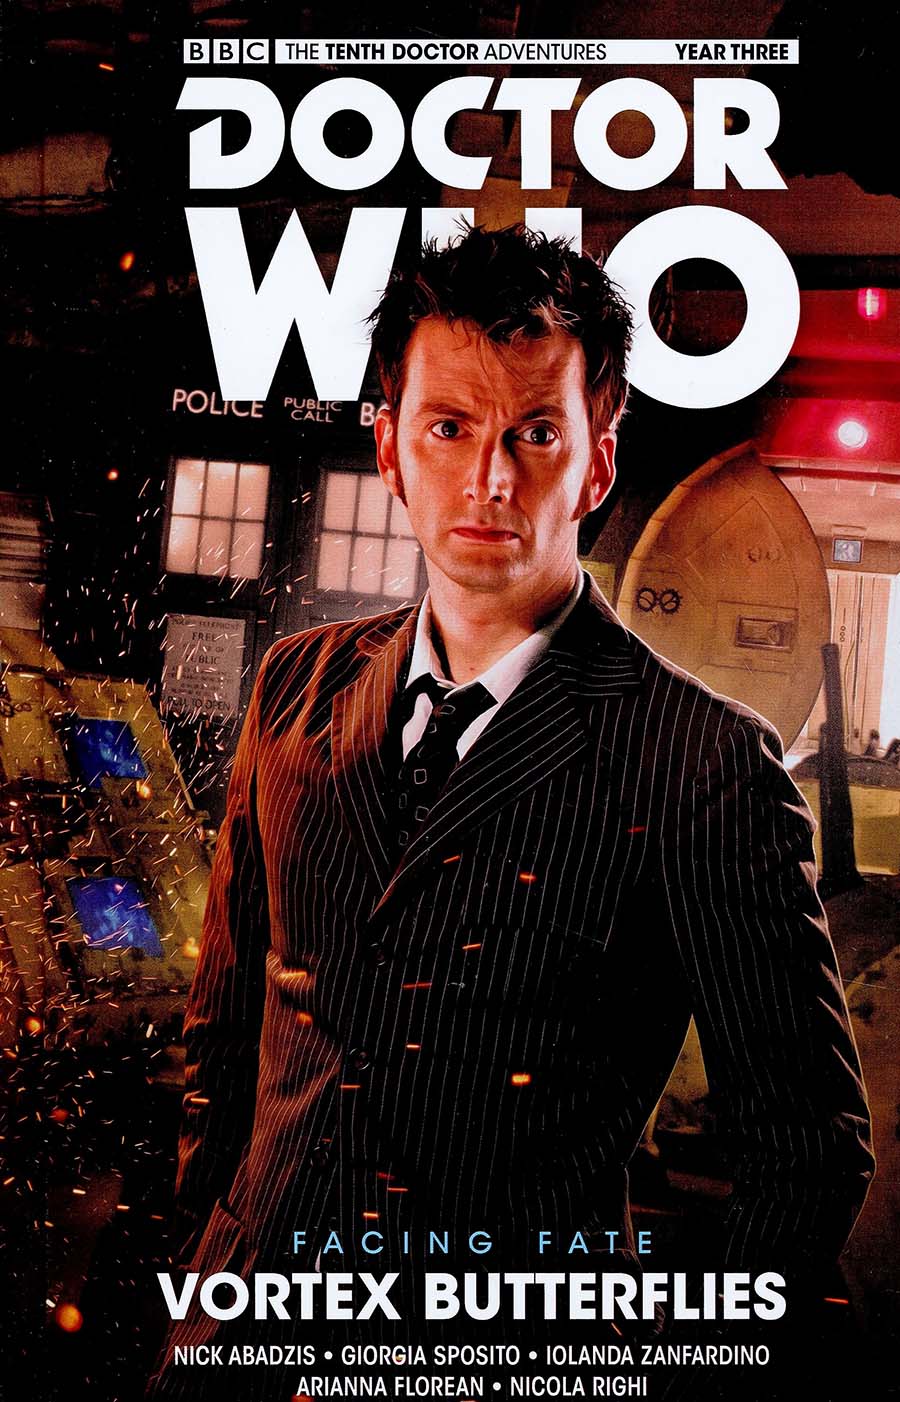 Doctor Who 10th Doctor Facing Fate Vol 2 Vortex Butterflies HC